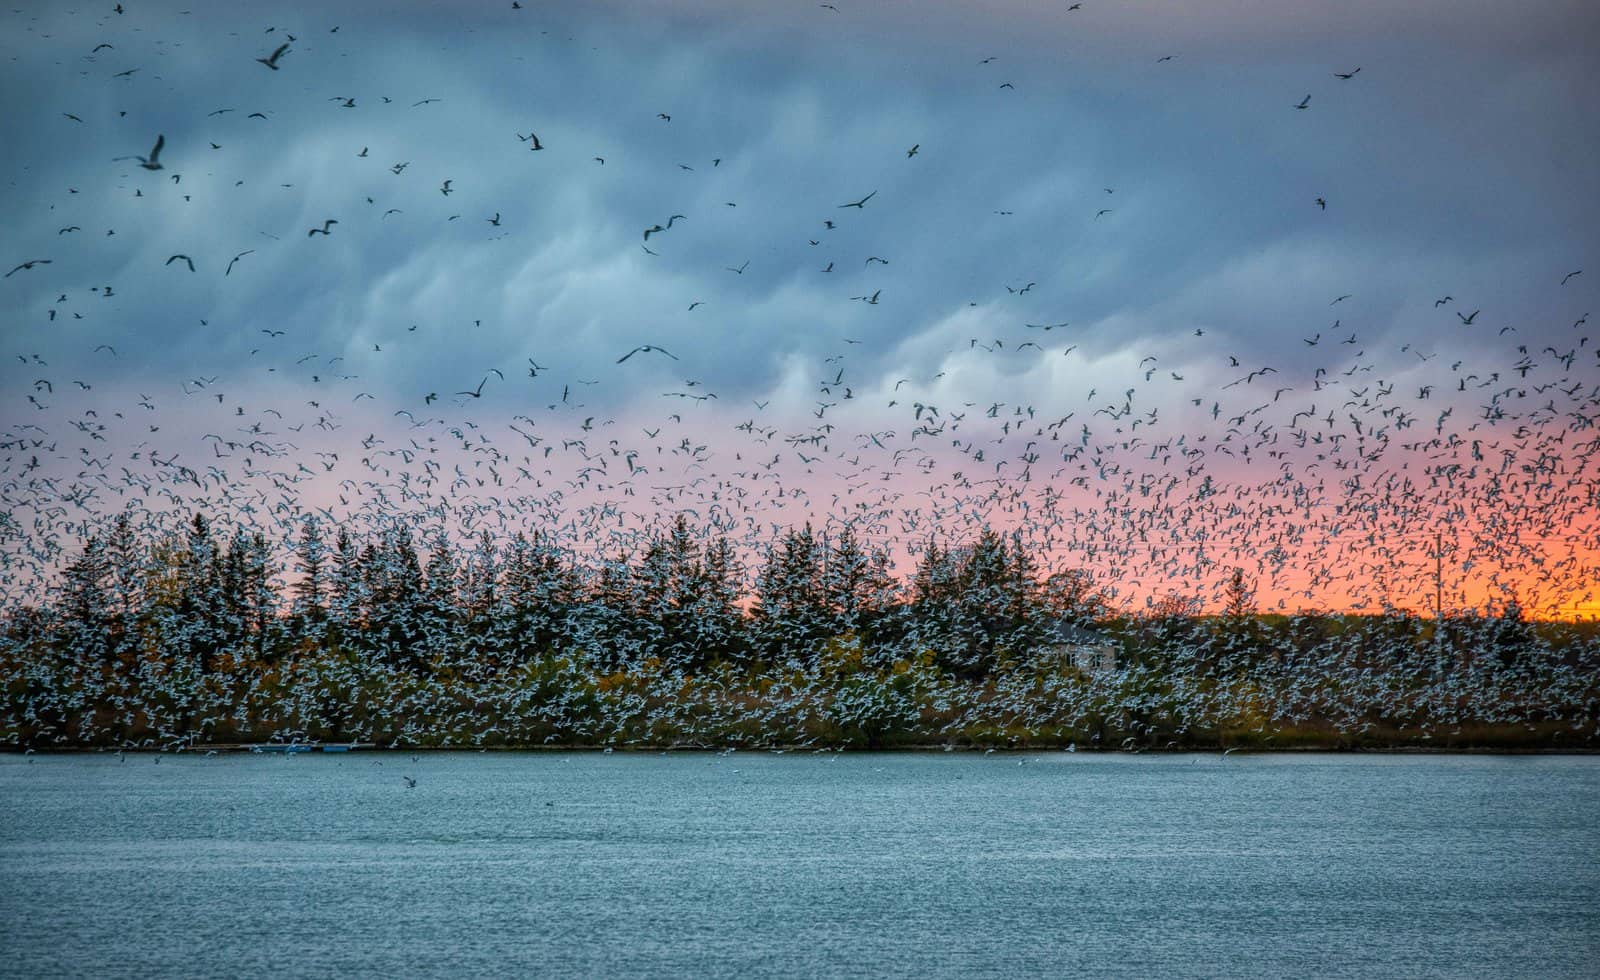 Best things to do in Winnipeg Canada - Mike Green - Sunset goose flights at FortWhyte Alive by Abby Matheson courtesy of Tourism Winnipeg